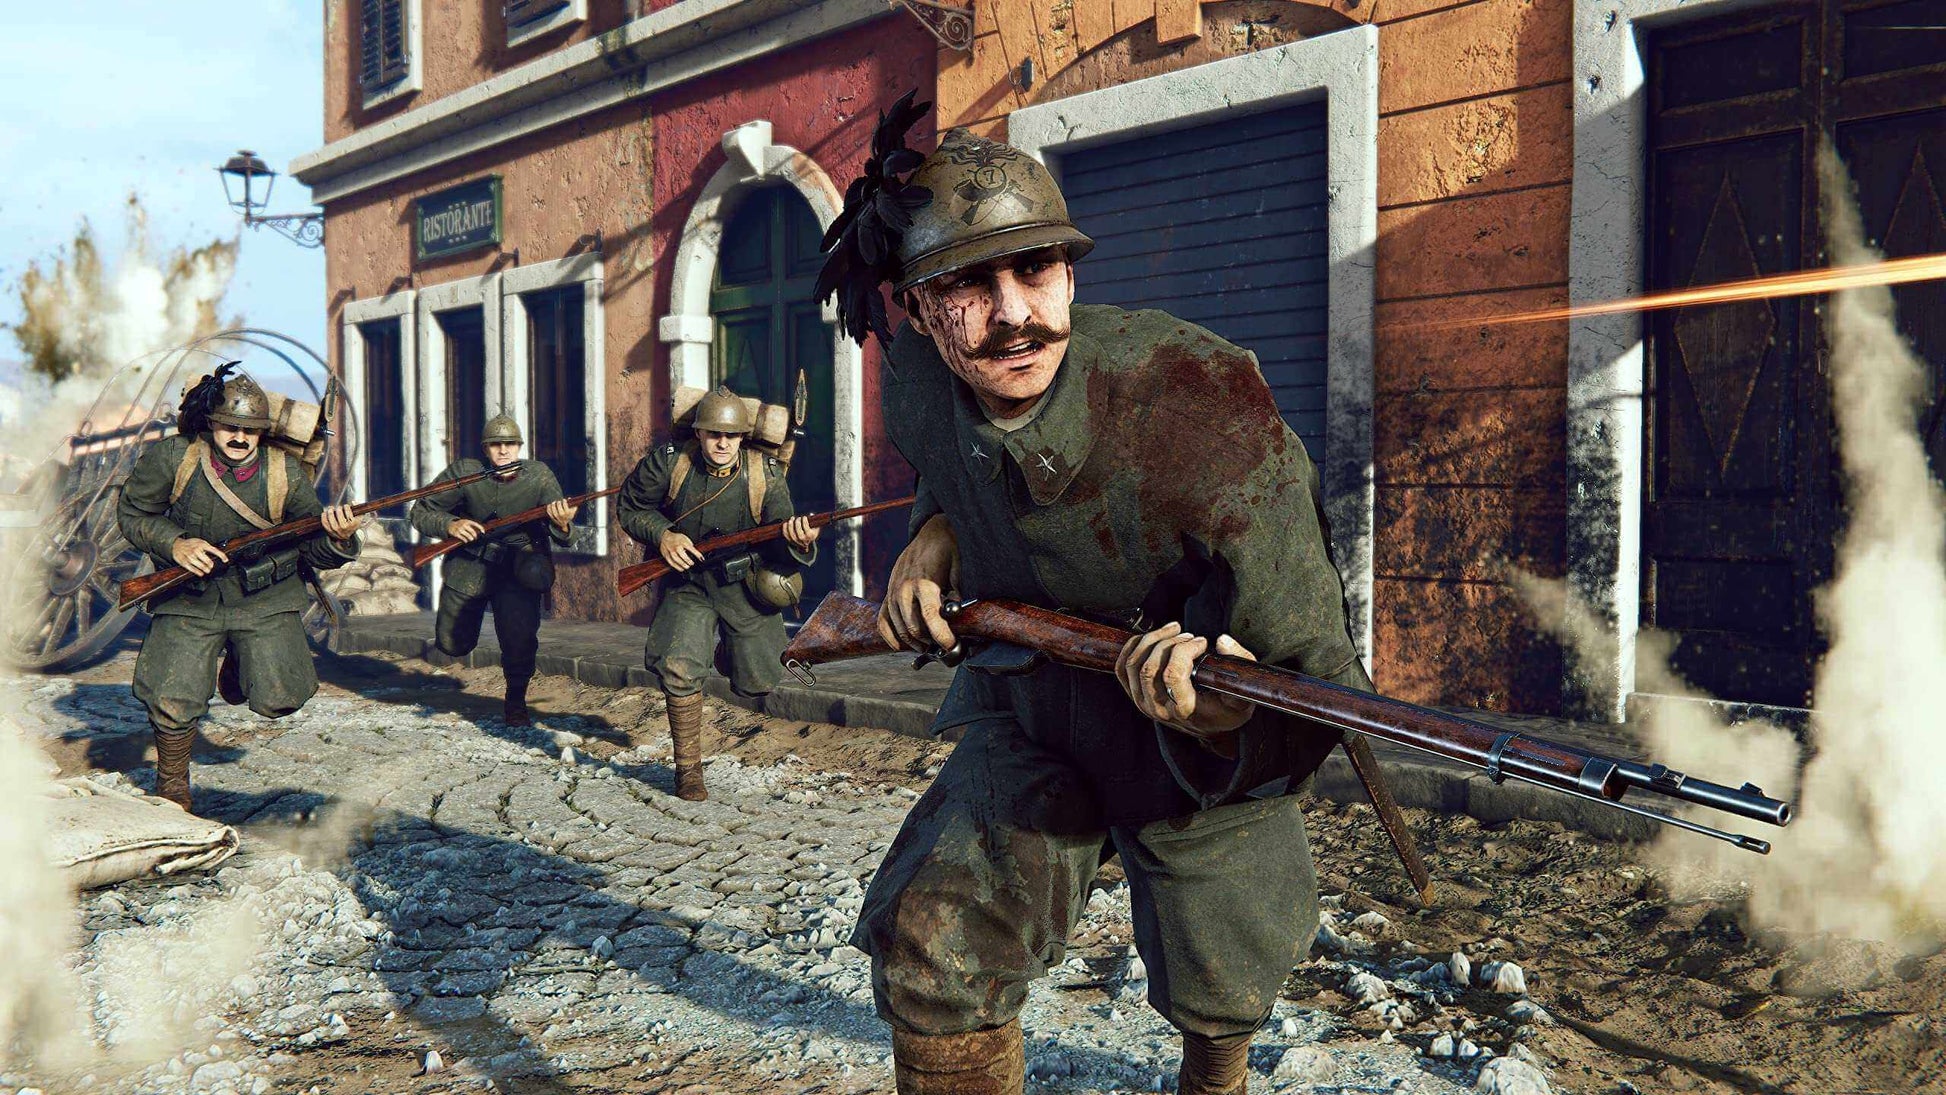 Isonzo Deluxe Edition PS4 £19.99